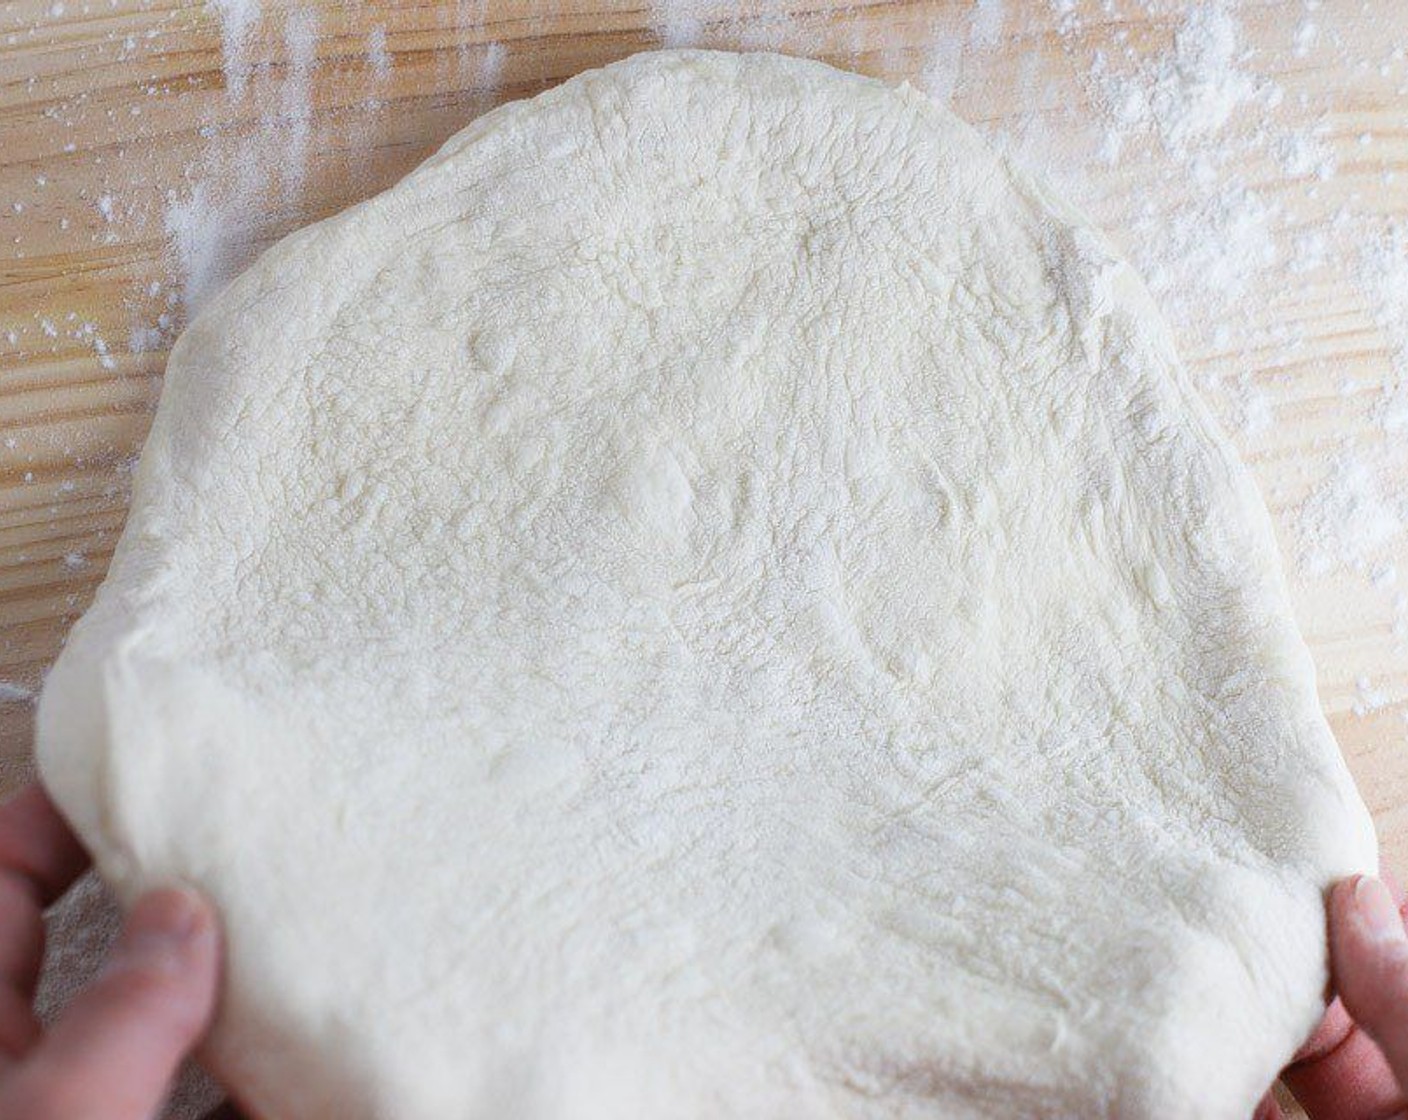 step 11 Form a dough ball into a disk on a well-floured surface. Stretch by hand pushing outward starting at the middle until round and about a 12-inch diameter pie.